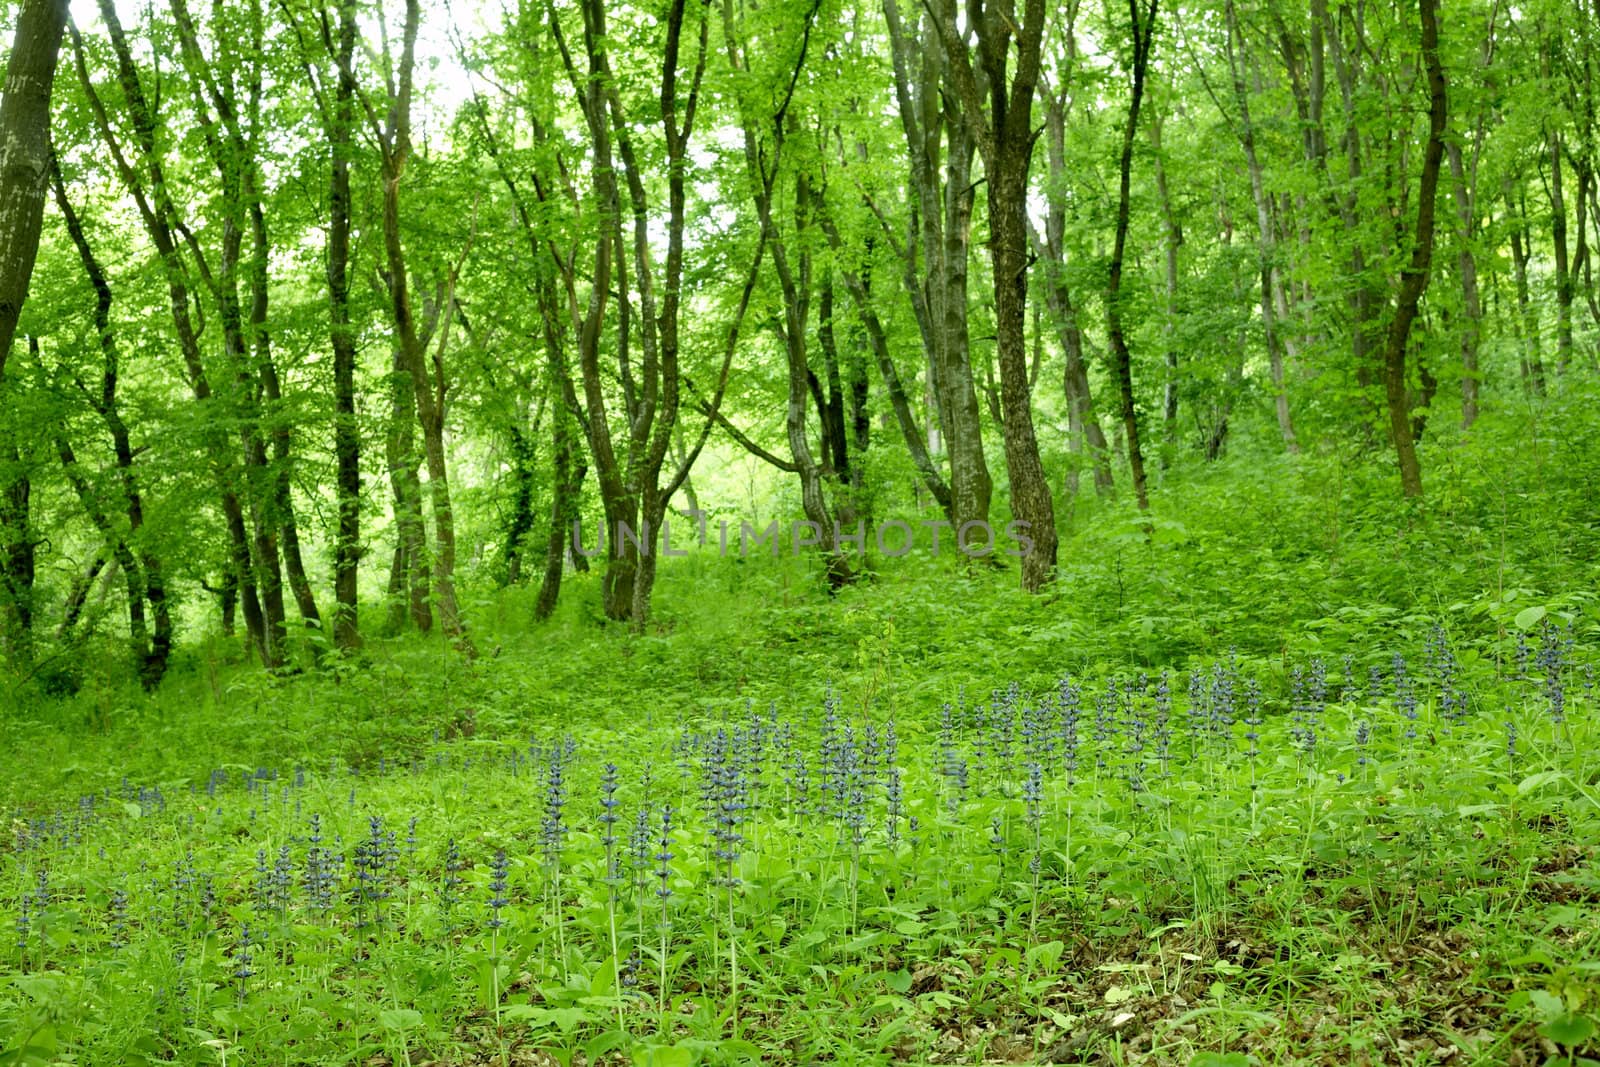 An image of a green grass in a forest